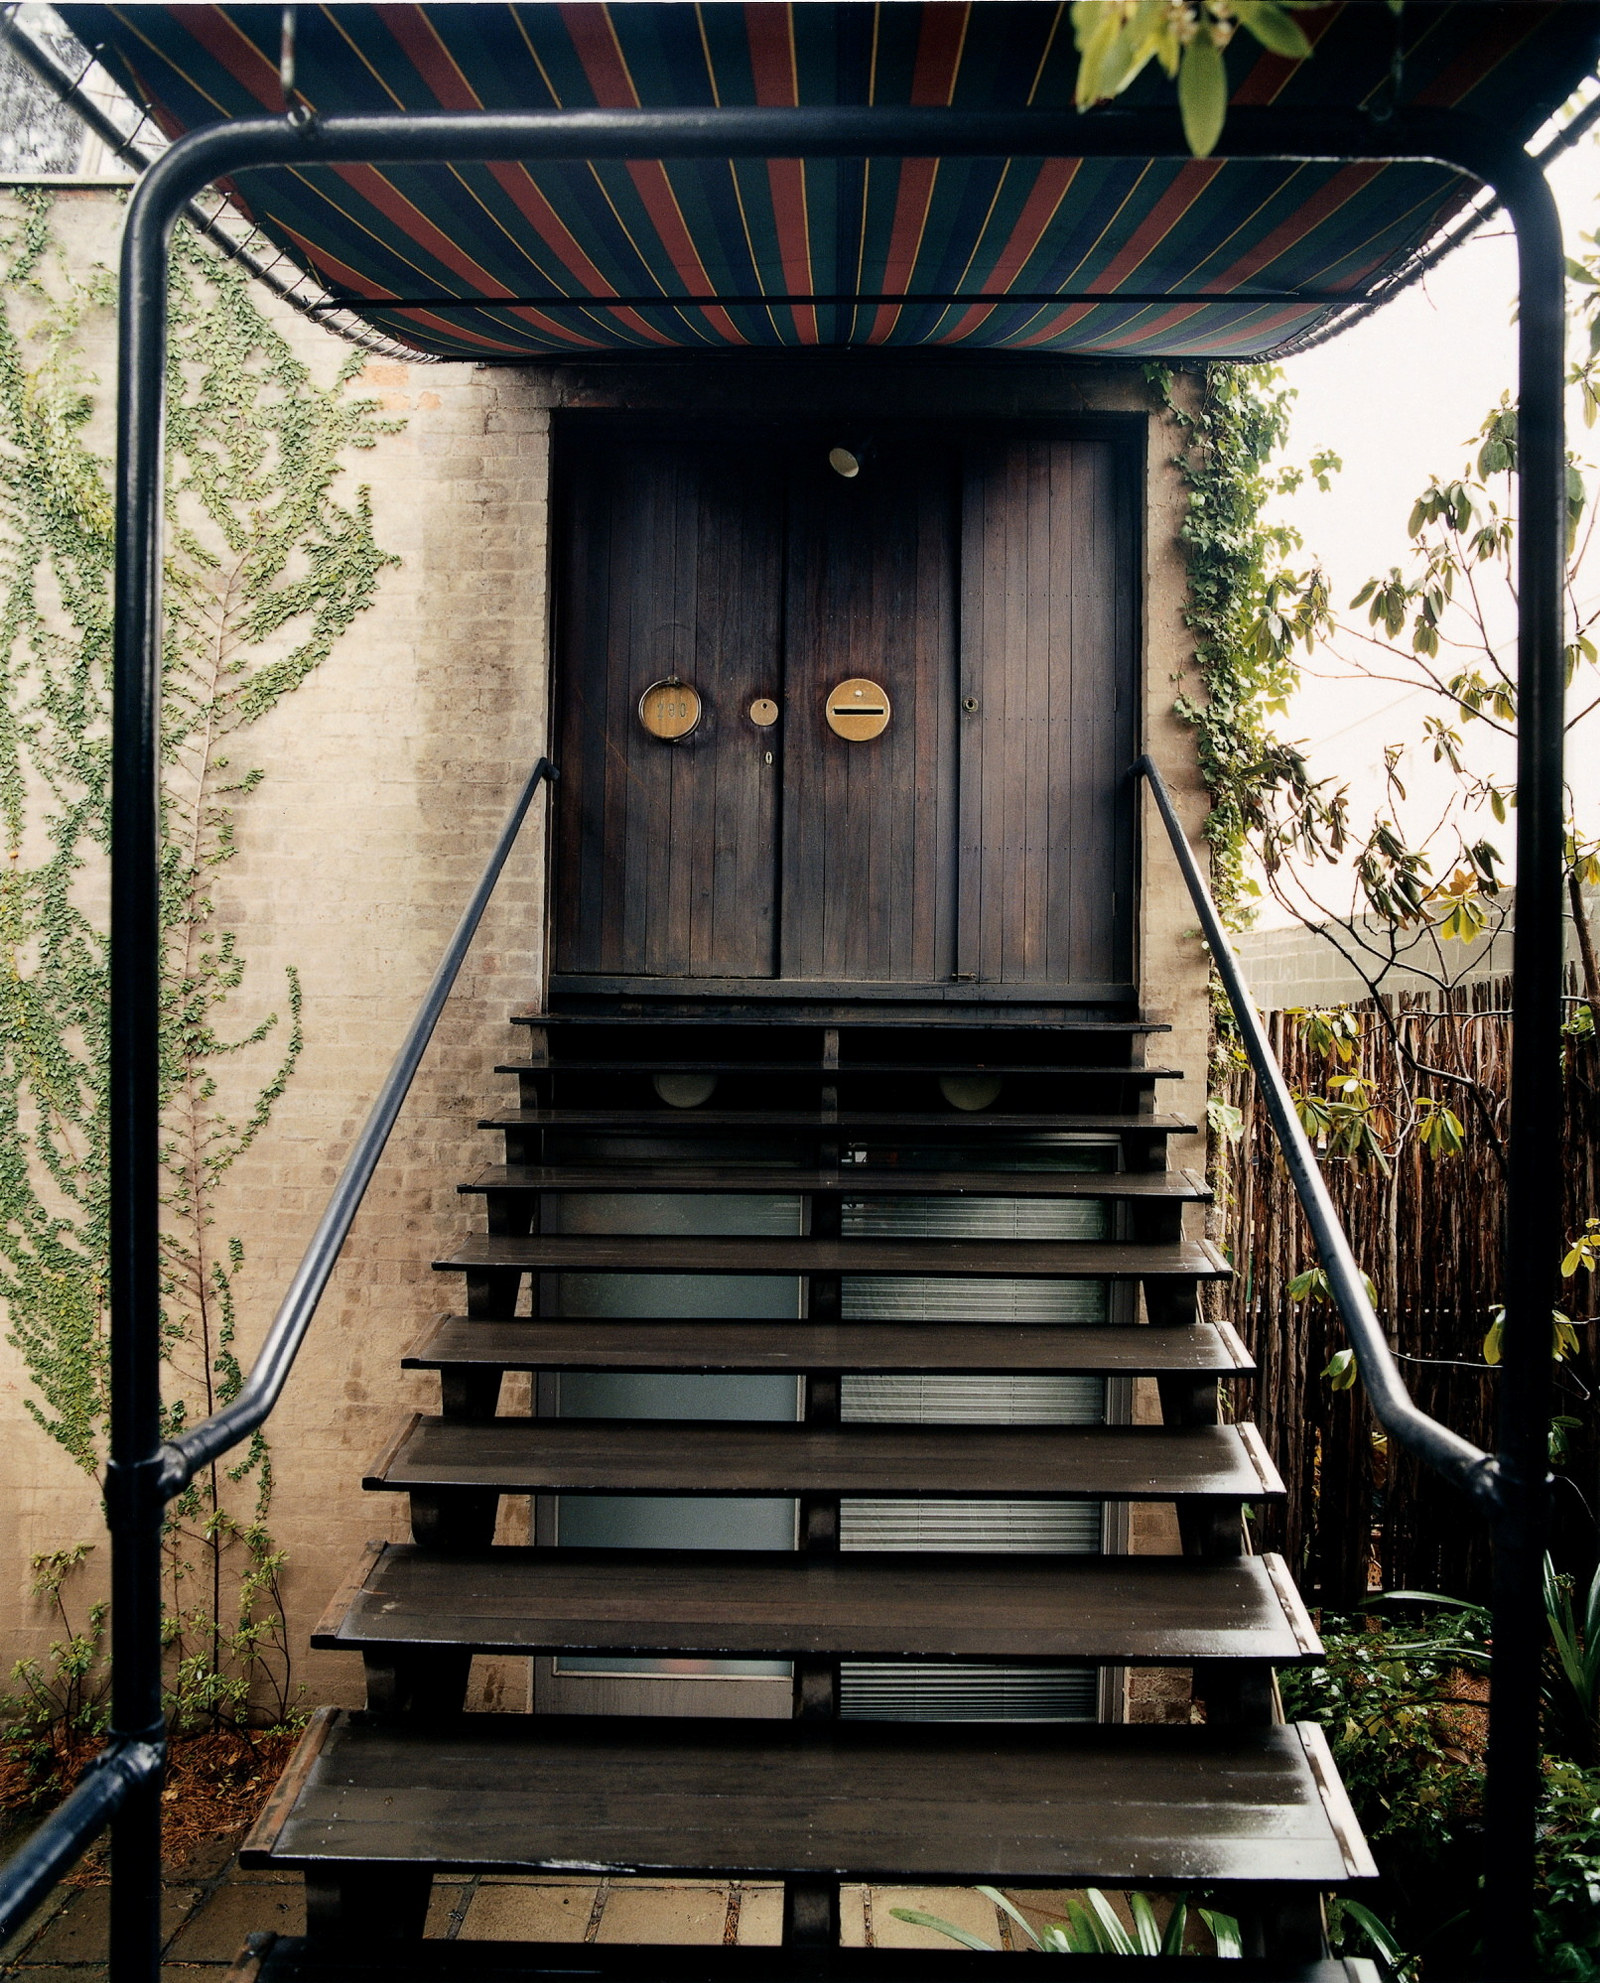 This is a colour photograph of open shallow timber staircase leading to a large timber door with a canopy covering the stairs and doorway